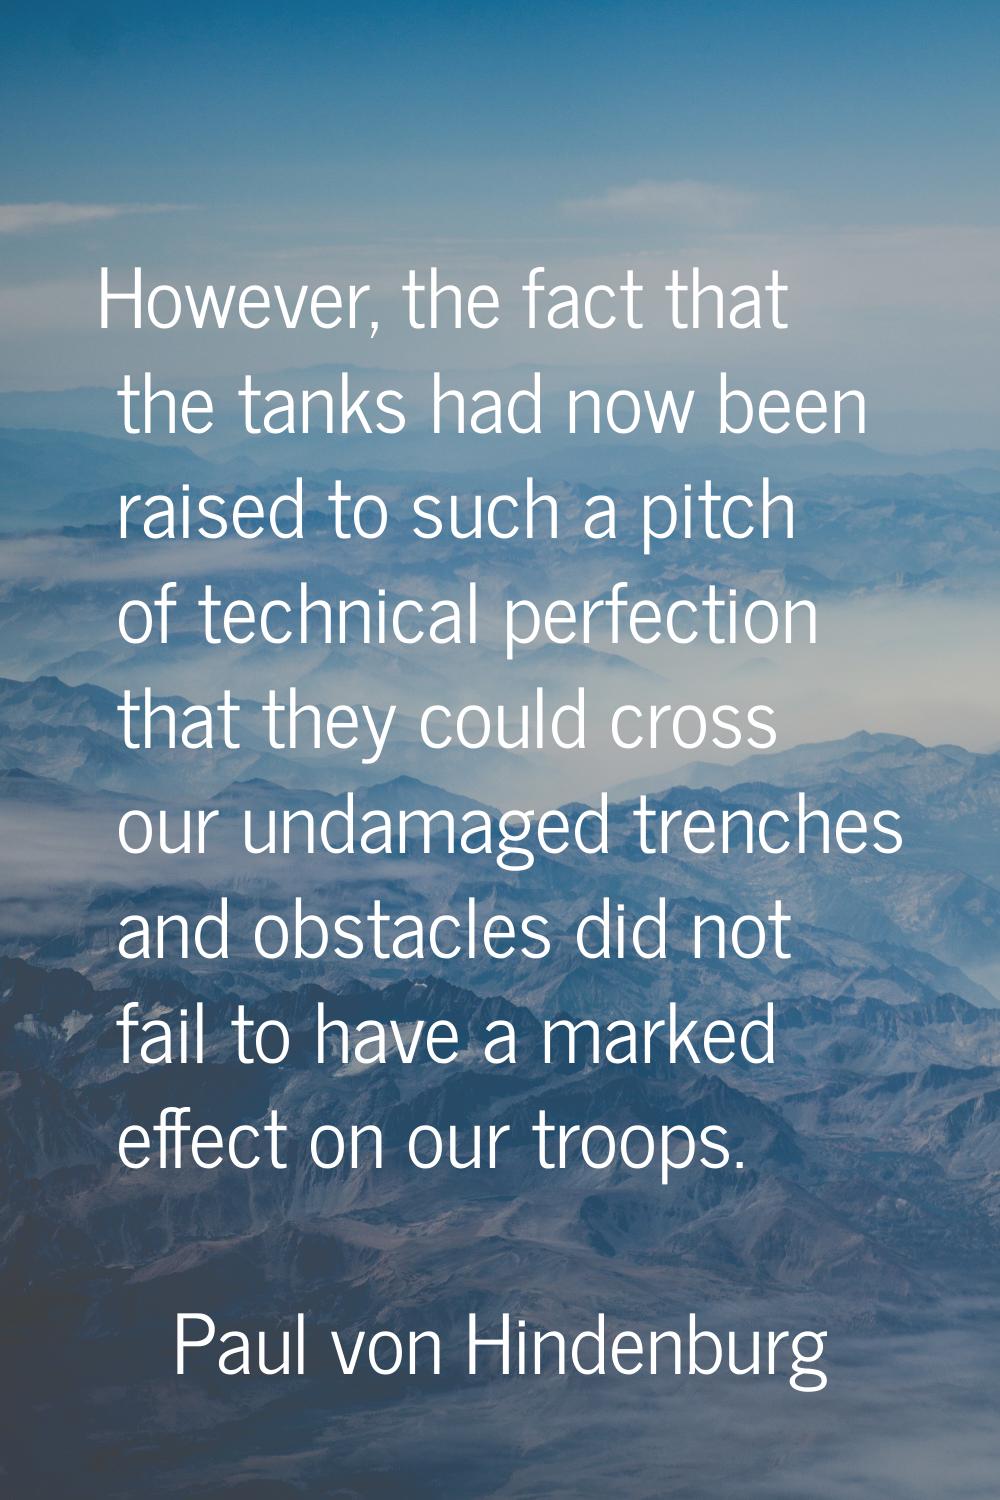 However, the fact that the tanks had now been raised to such a pitch of technical perfection that t